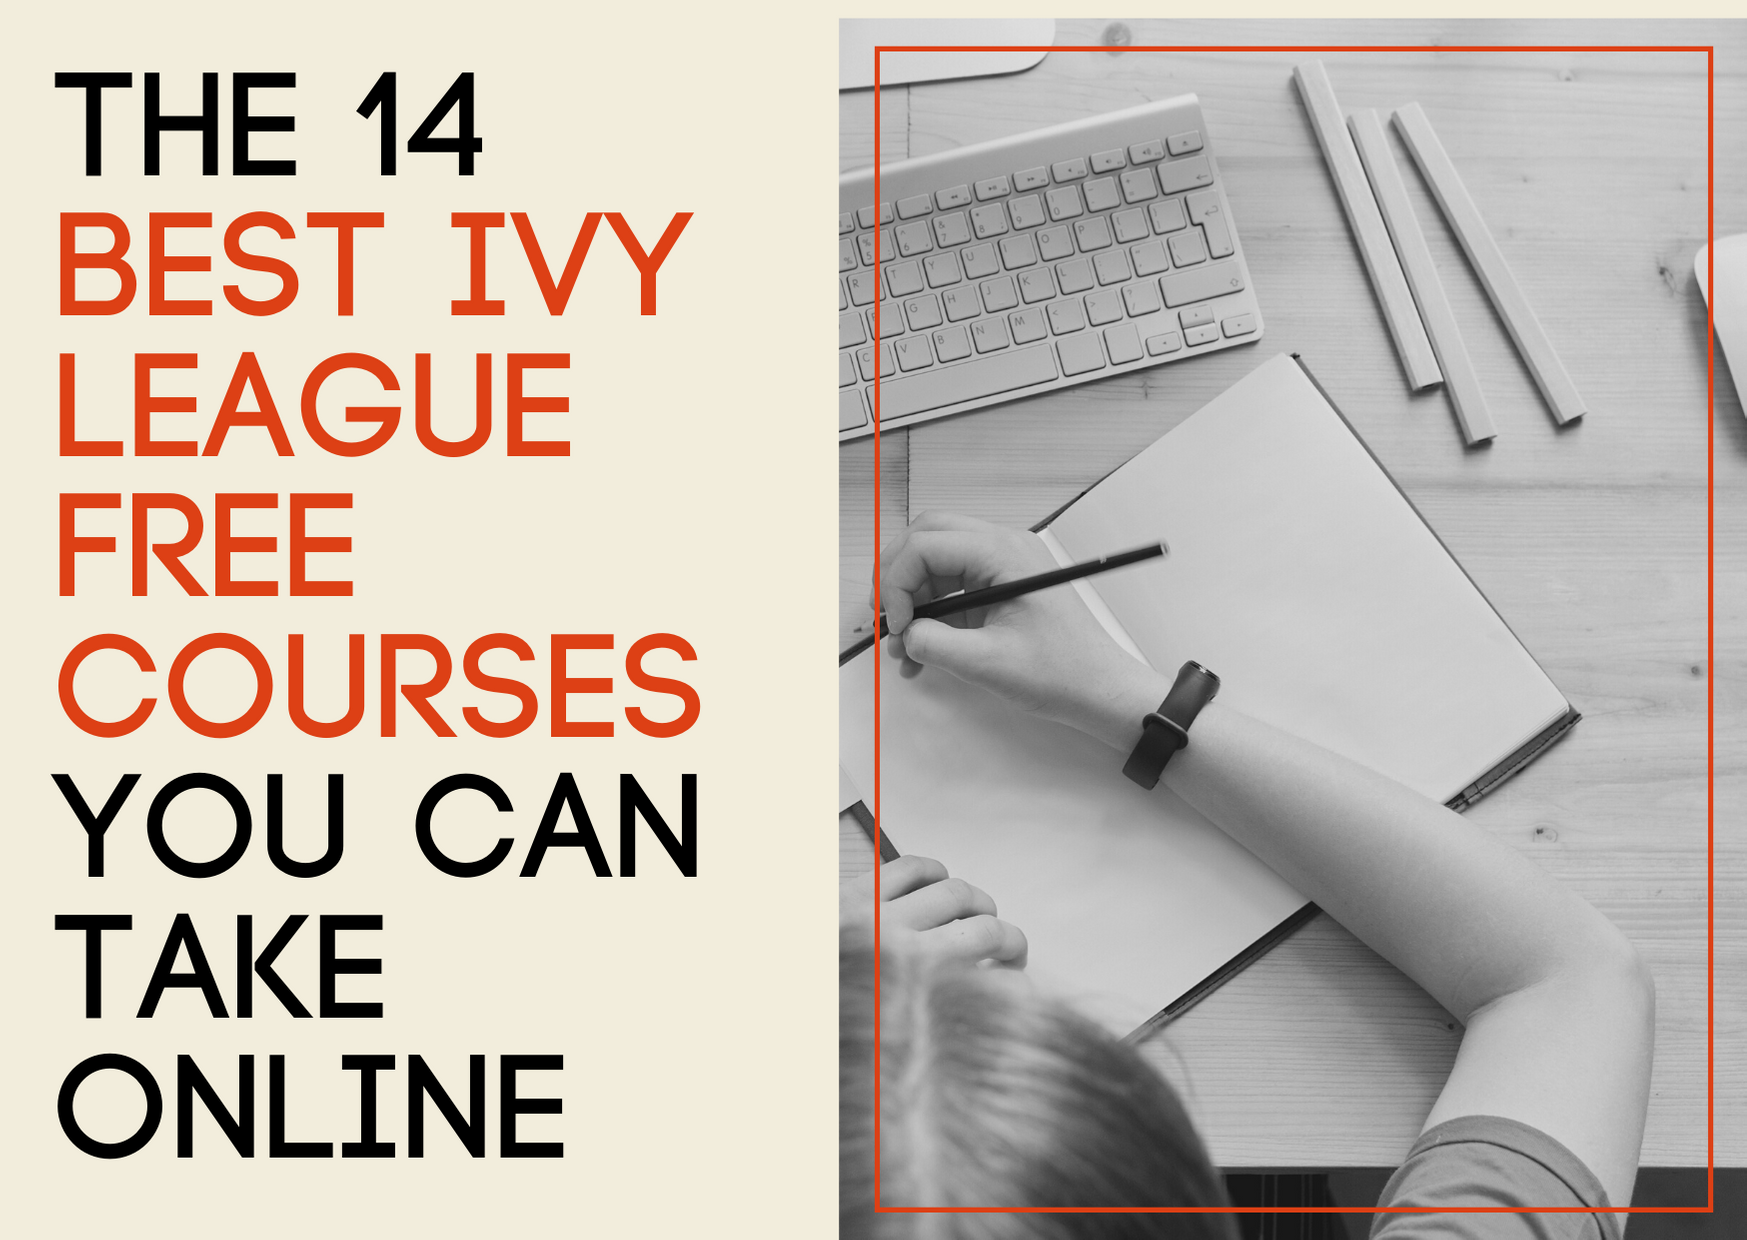 Here are 450 Ivy League courses you can take online right now for free